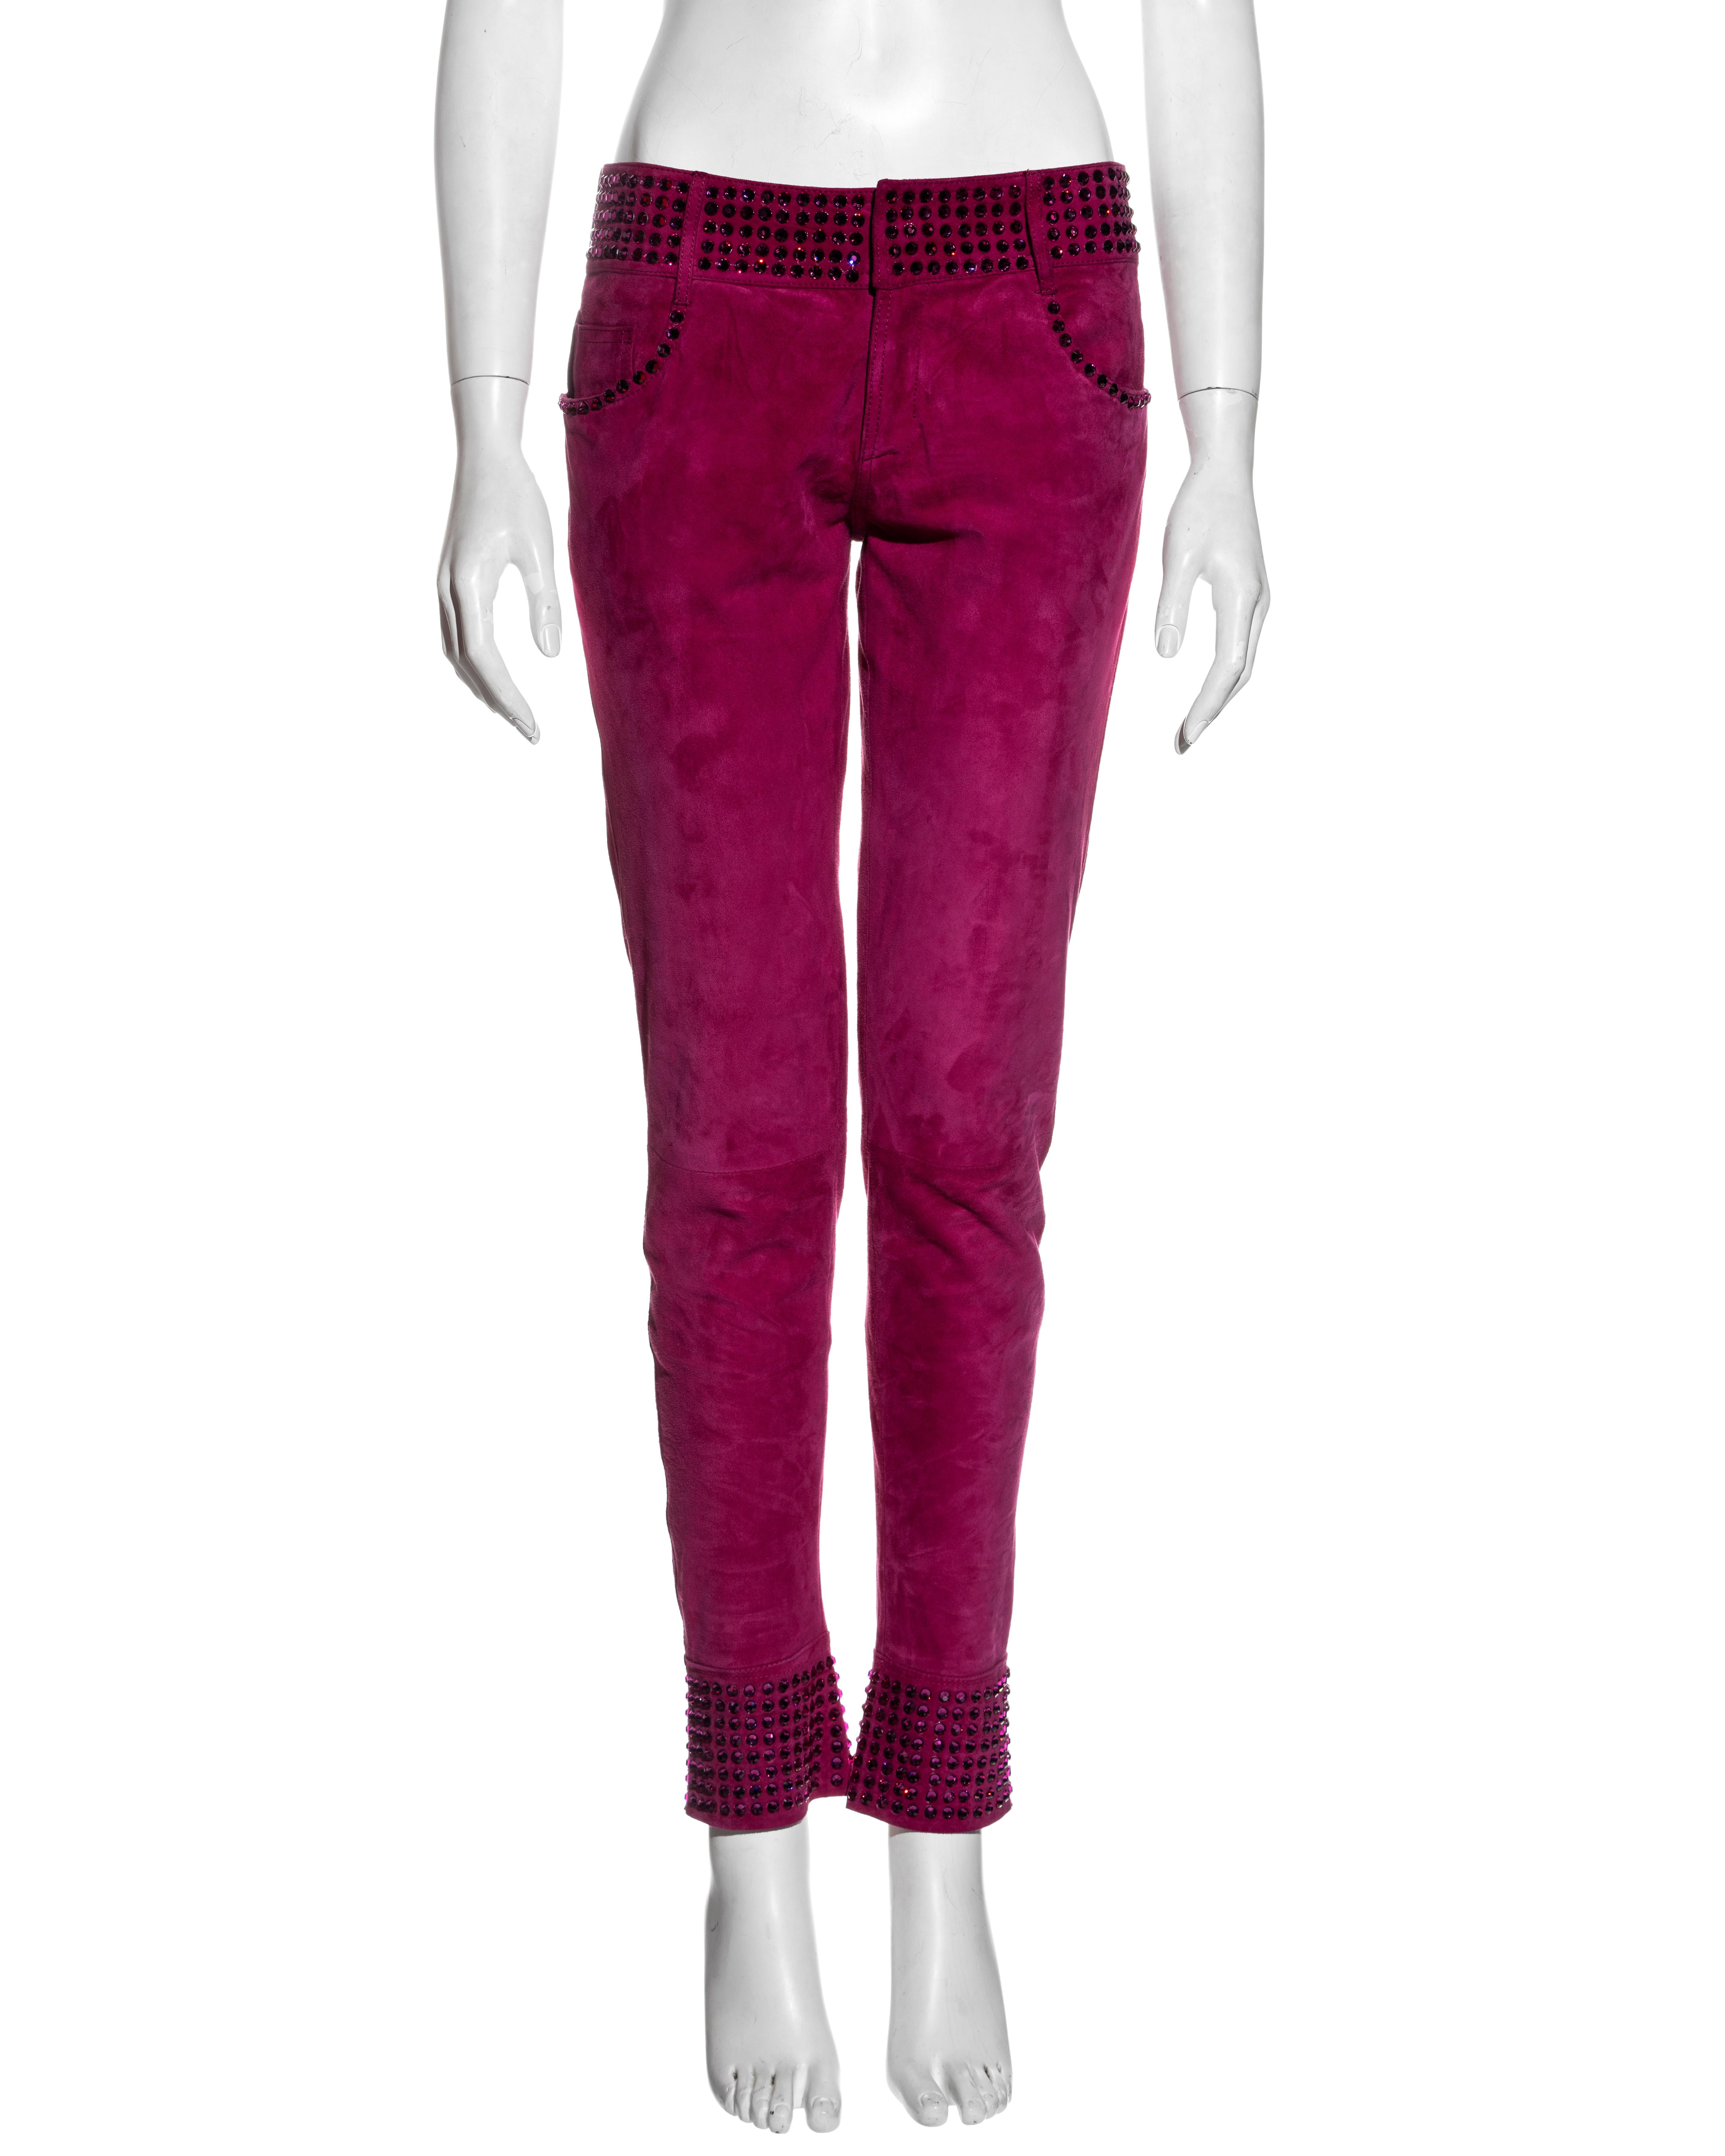 ▪ D&G pink suede pants 
▪ Designed by Dolce & Gabbana 
▪ Slim fit 
▪ Crystal adornments 
▪ 28